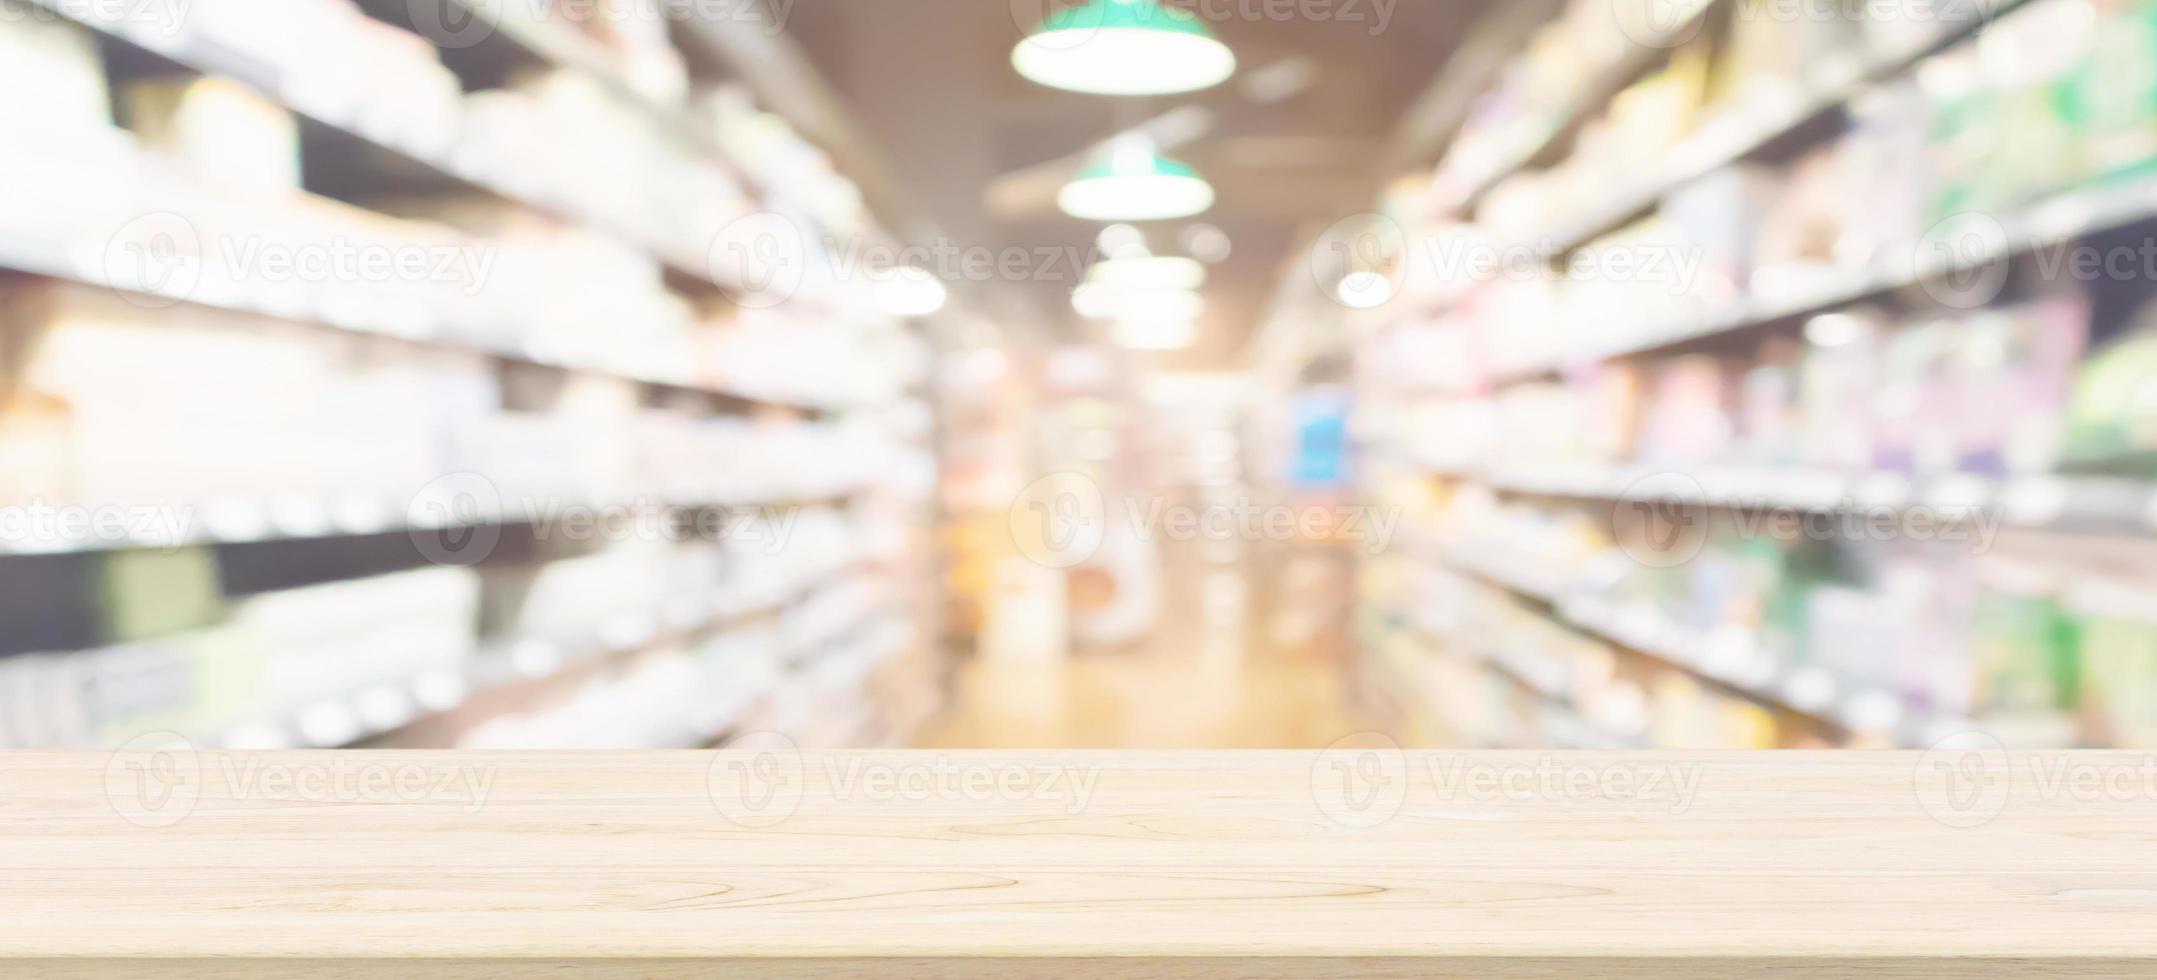 Wood table top with supermarket aisle blur background for product display photo